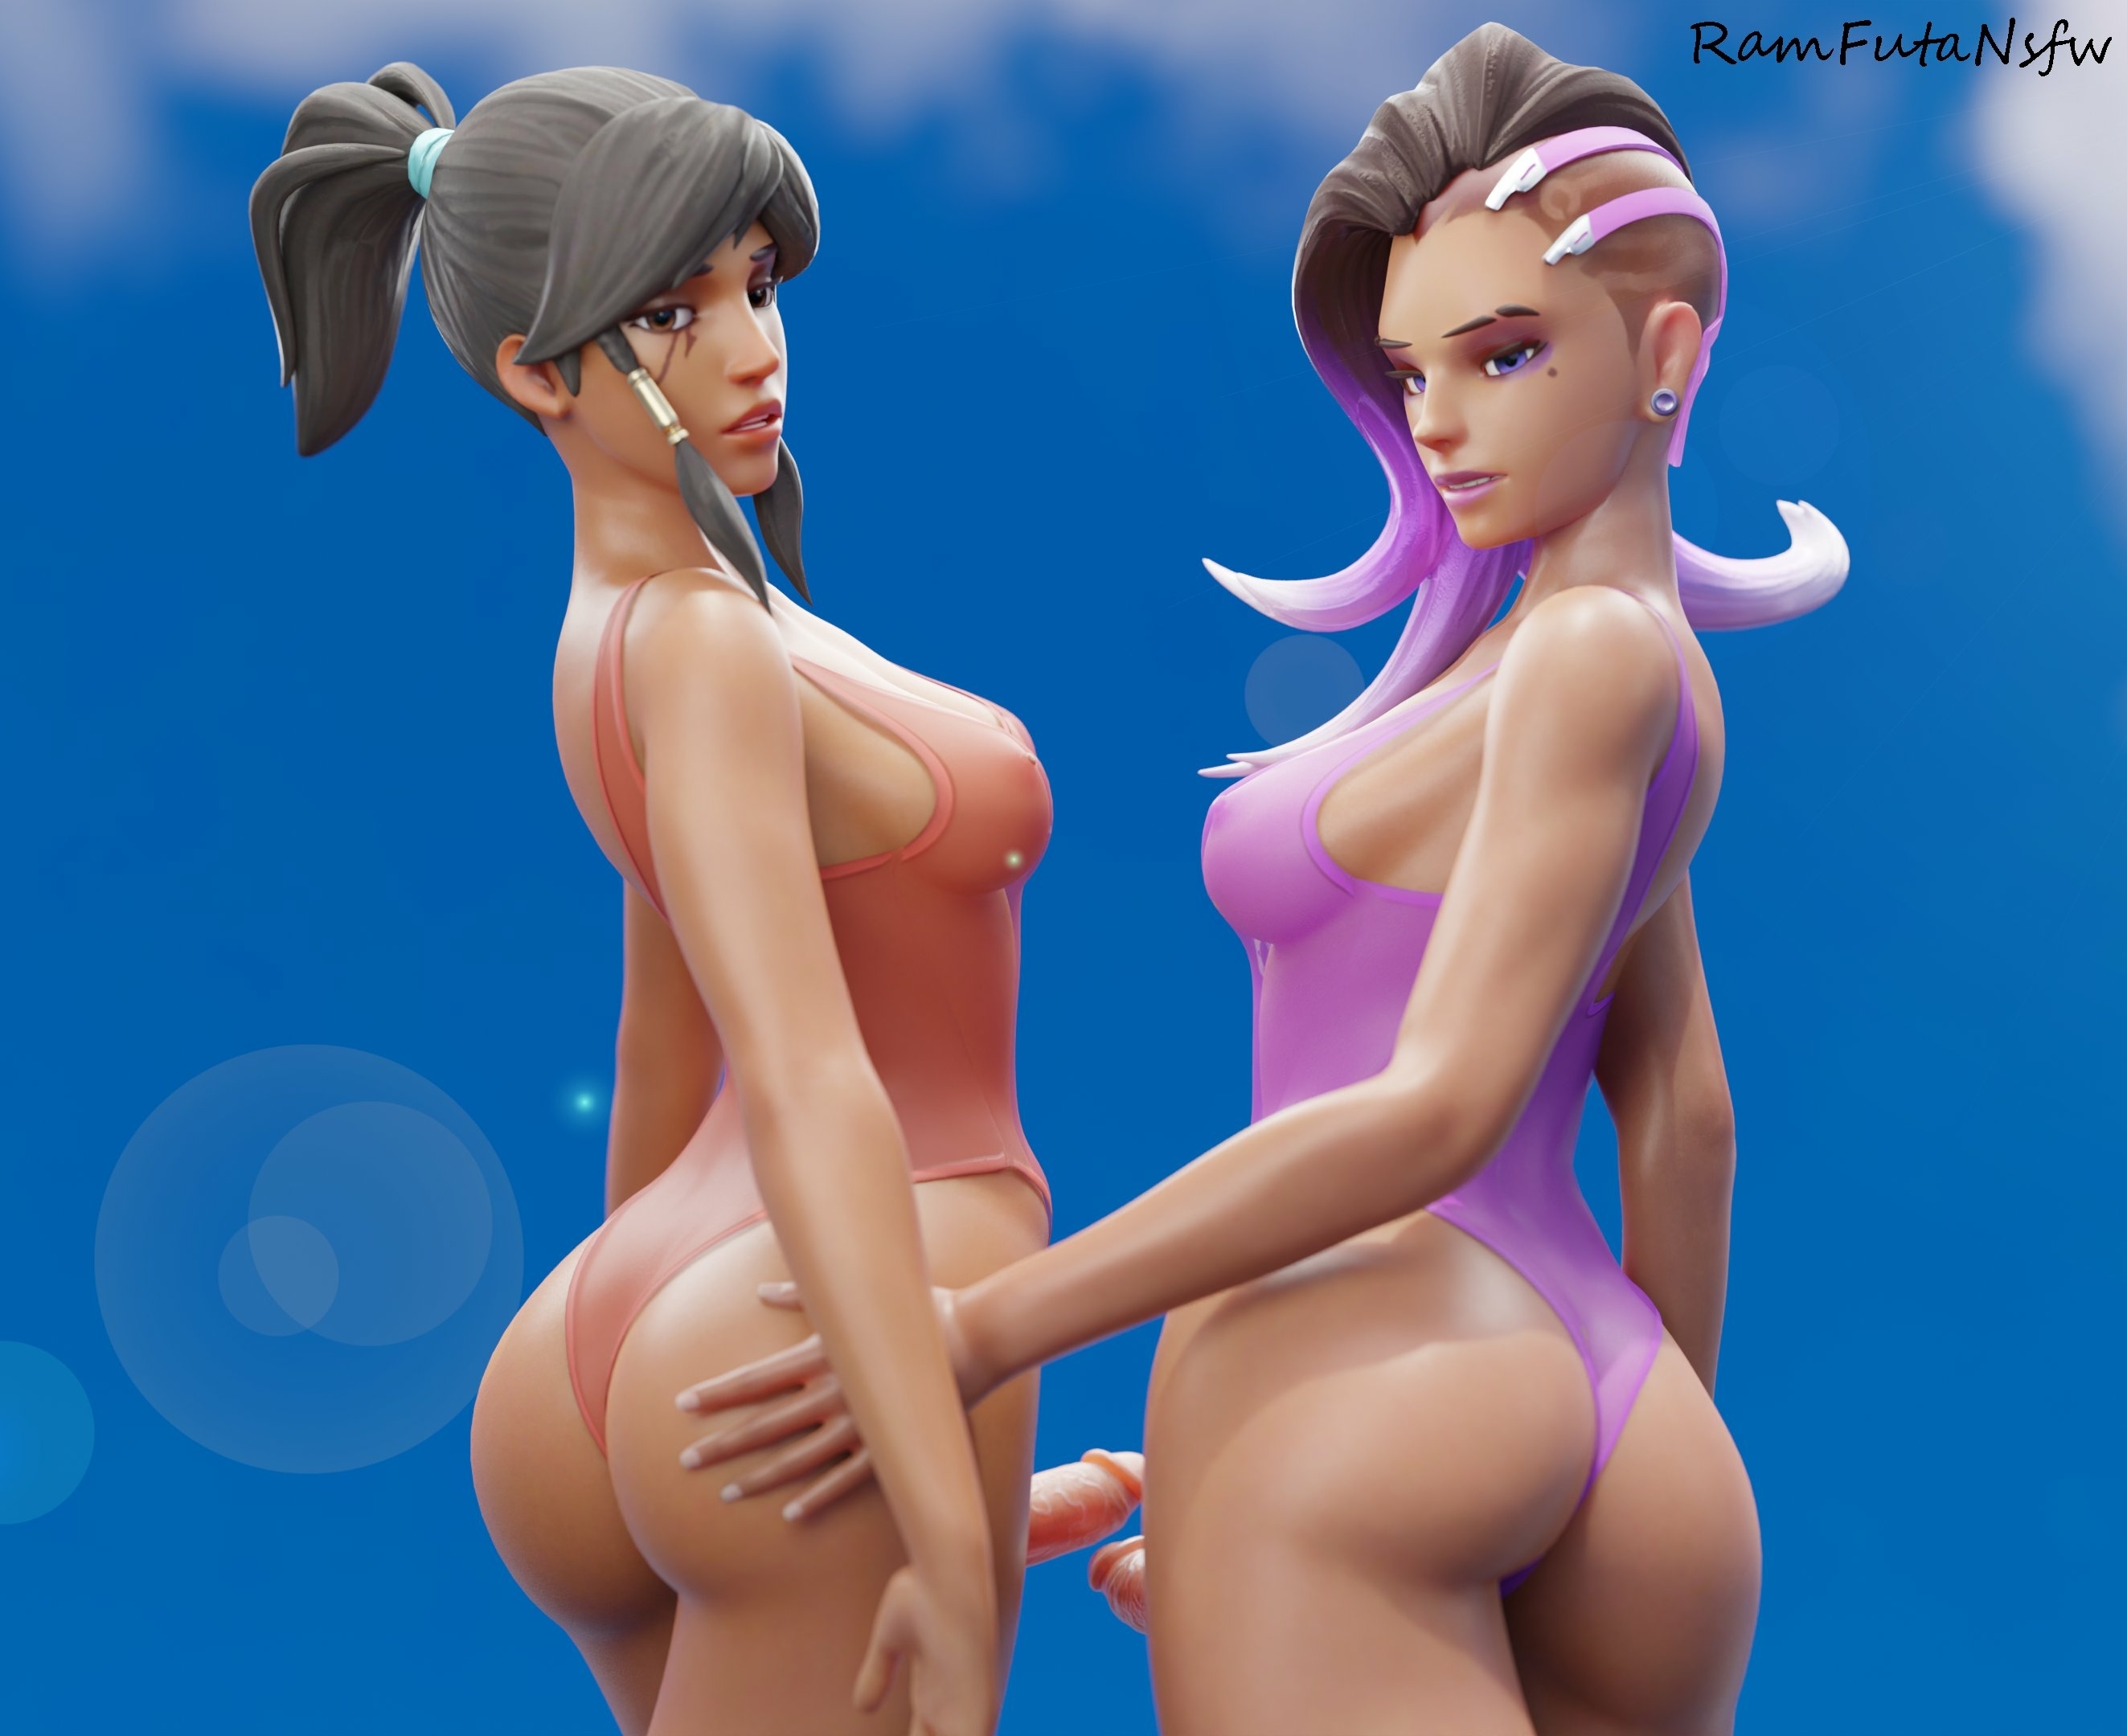 Sombra and pharahs day out at the beach Sombra Pharah Overwatch Lingerie Sexy Lingerie Big Dick Dick Dickgirl Futa Futa On Female Pussy Shaved Pussy Boobs Big boobs Ass Horny Face Sexy 3d Porn 2